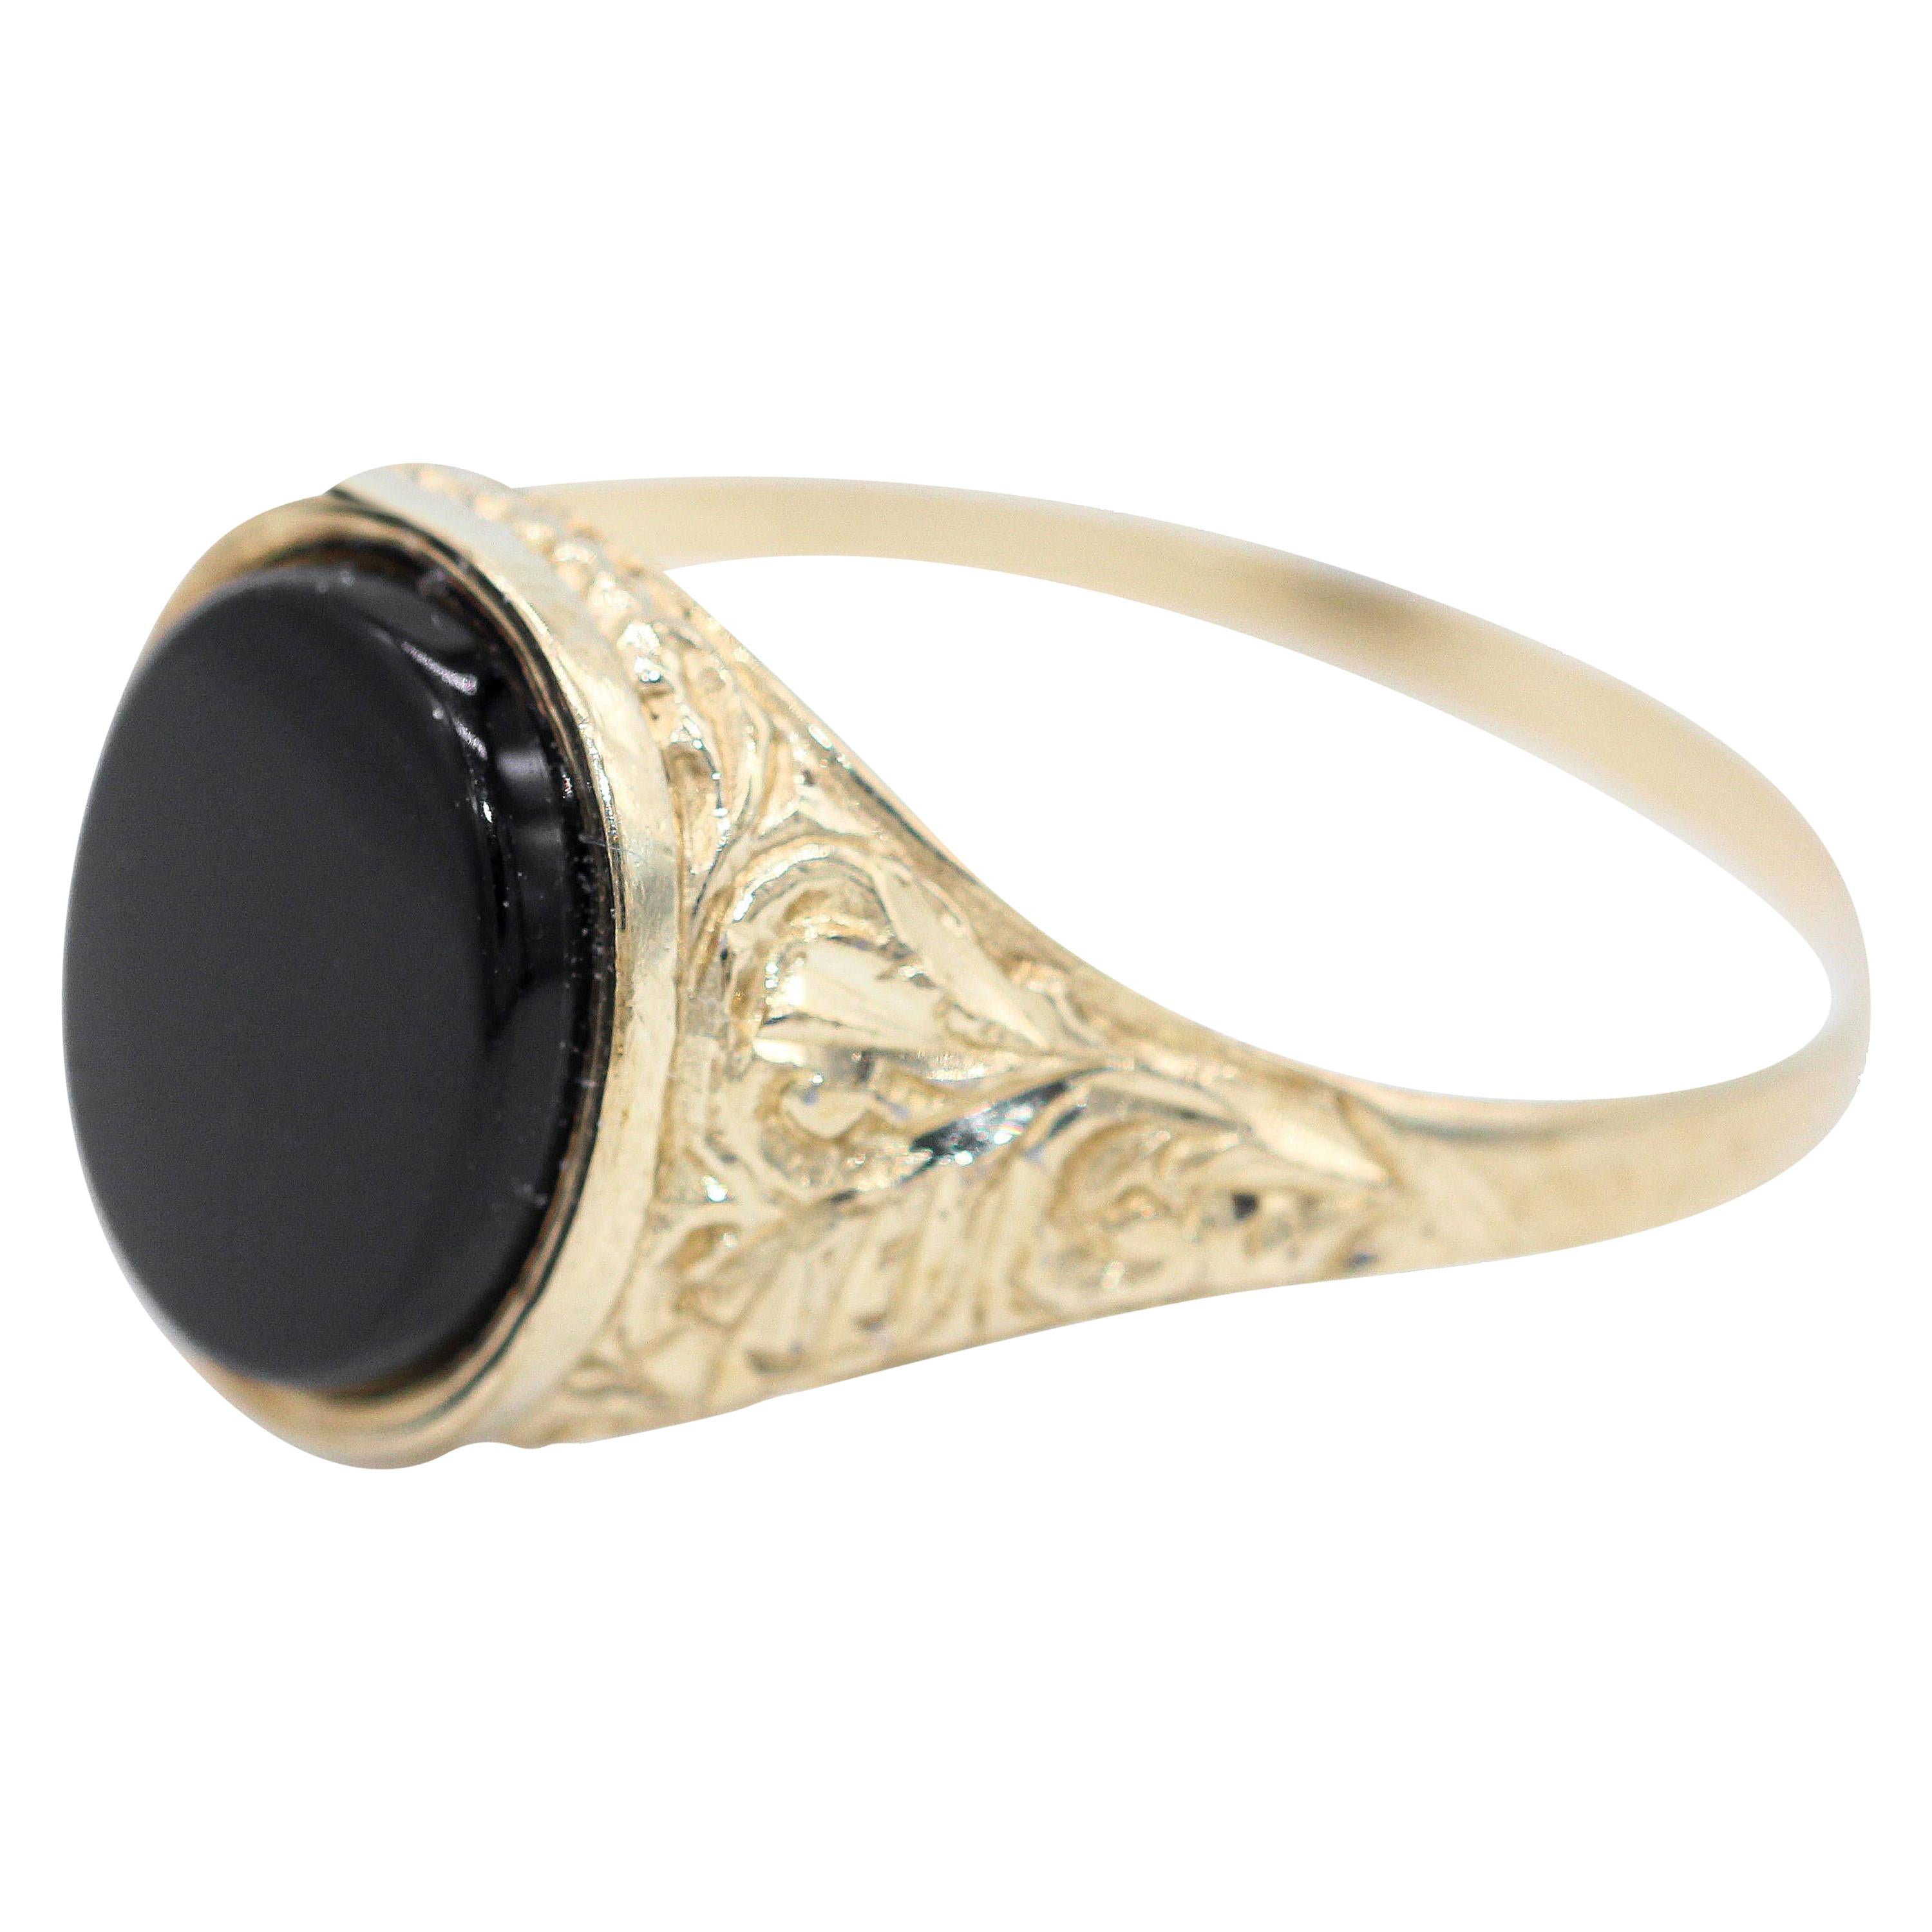 9 Kt Yellow Gold and Onyx Gentleman's Signet Ring with Oval Face